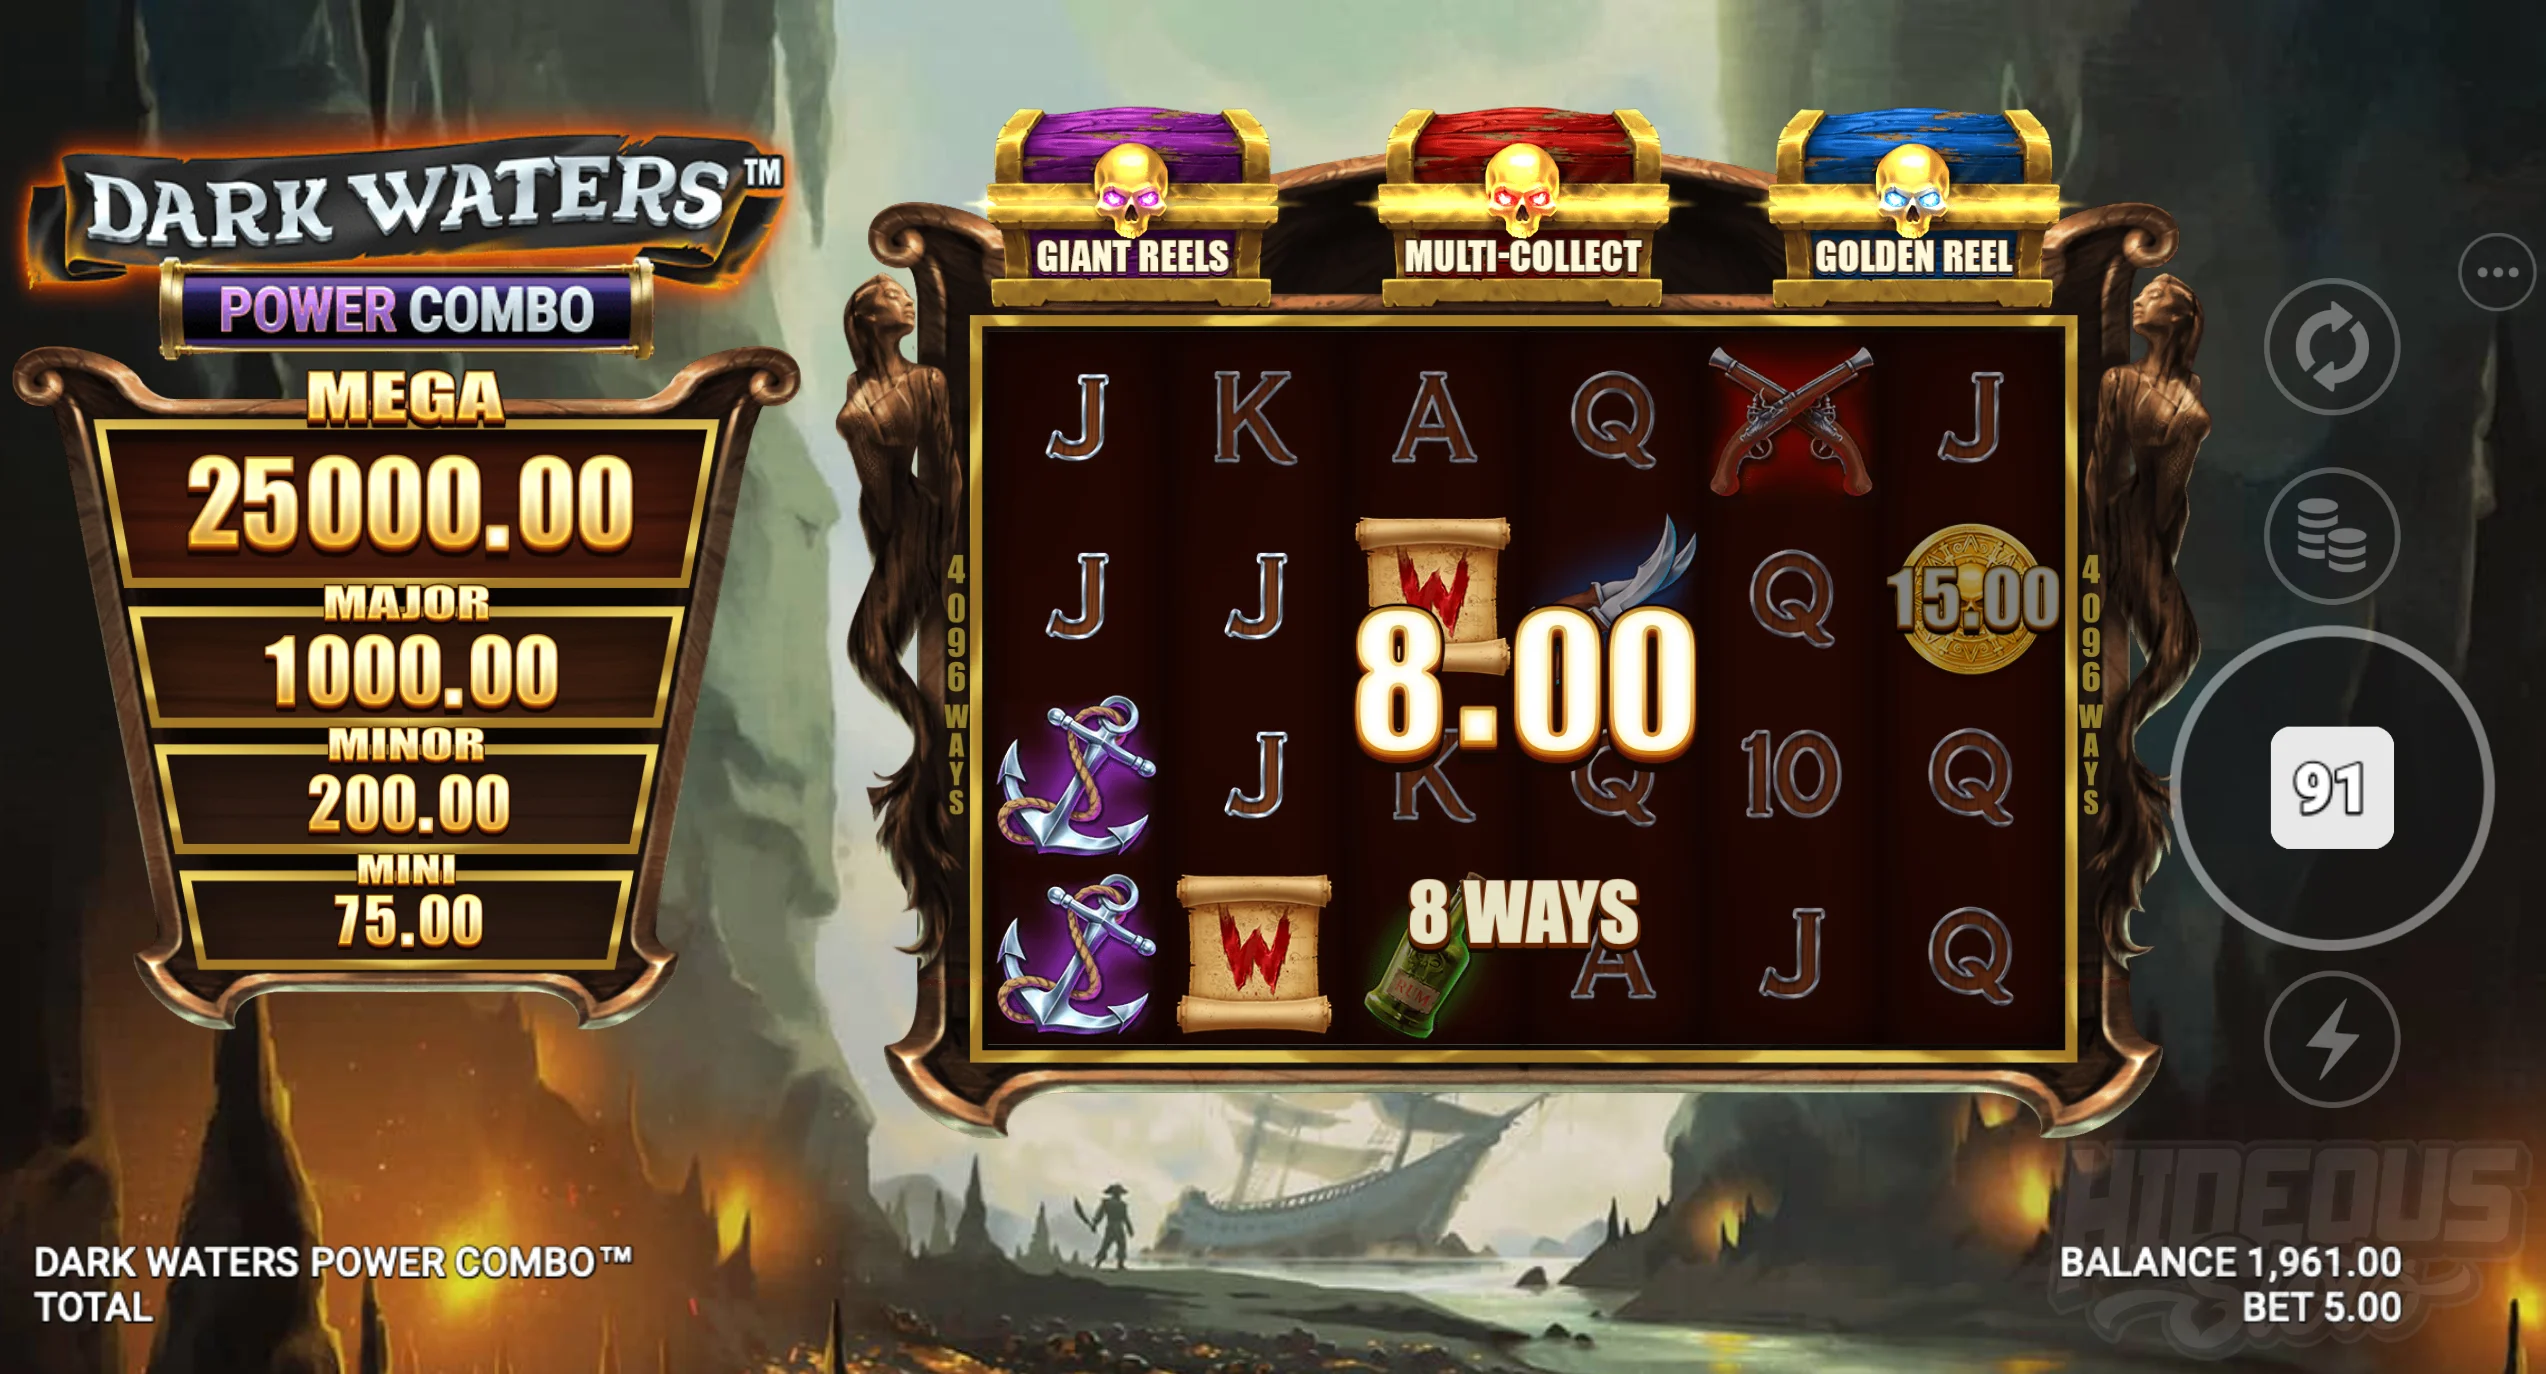 Dark Waters Power Combo Offers Players 4,096 Ways to Win